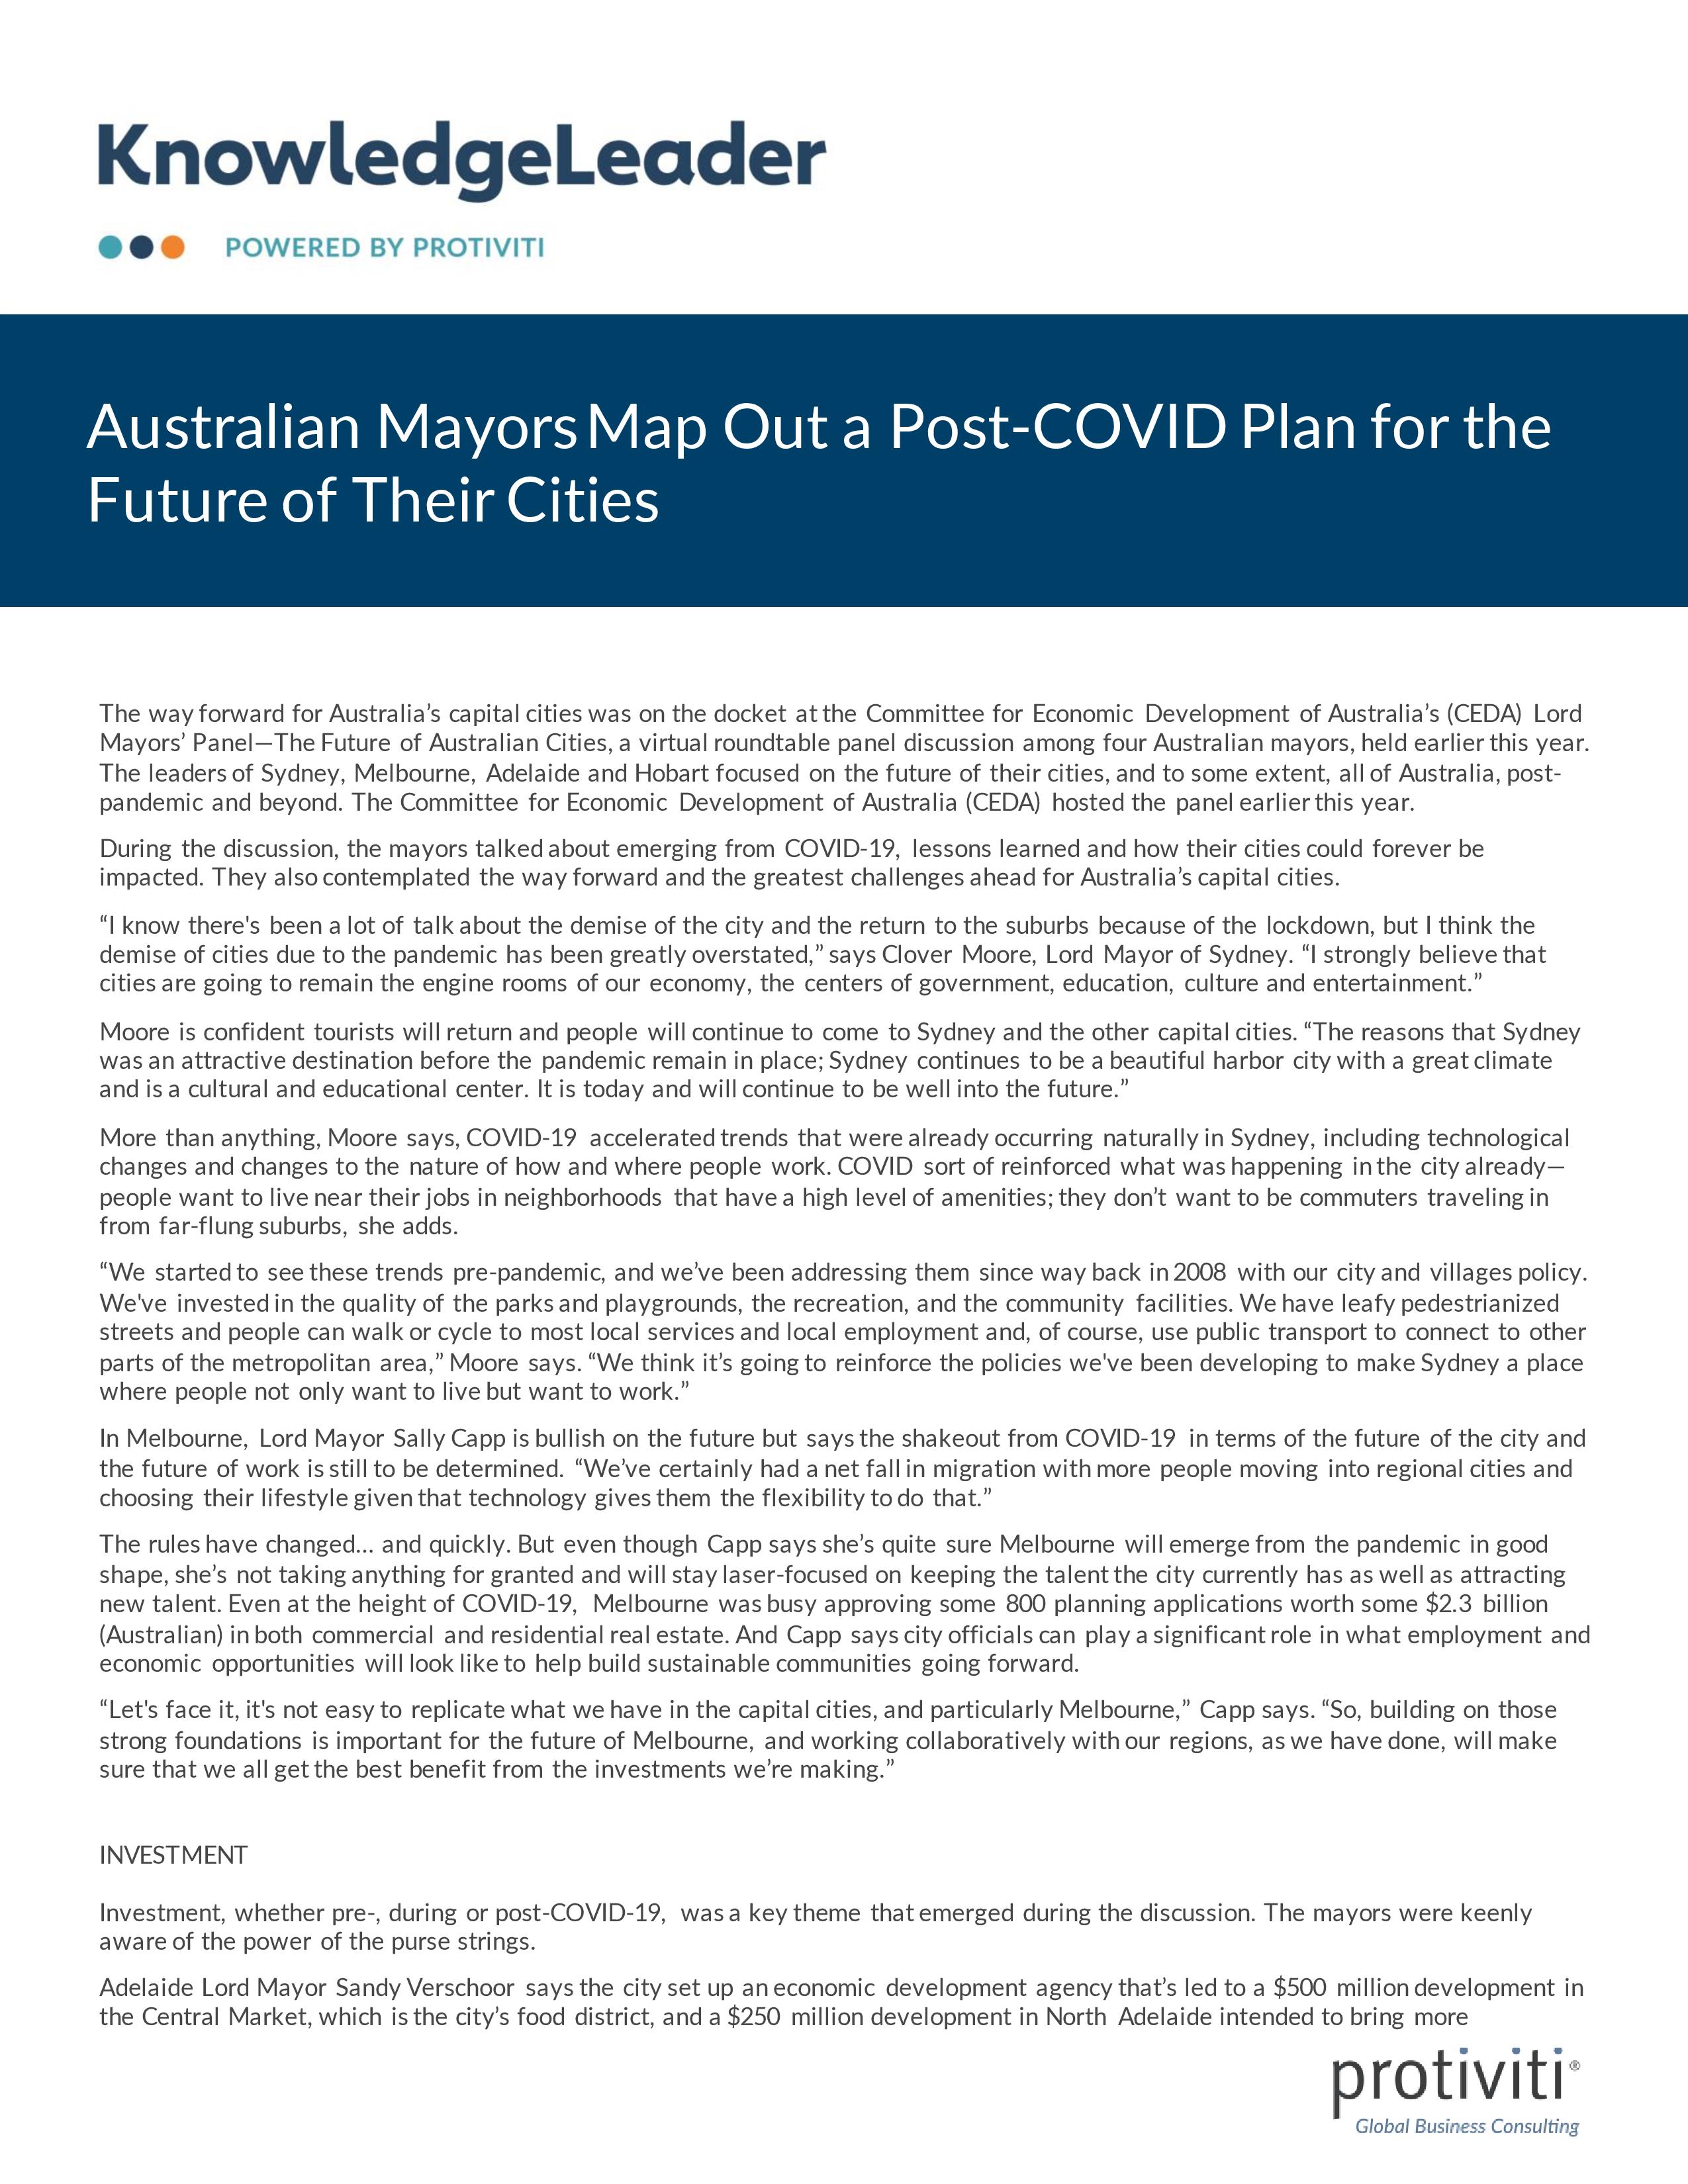 Screenshot of the first page of Australian Mayors Map Out a Post-COVID Plan for the Future of Their Cities